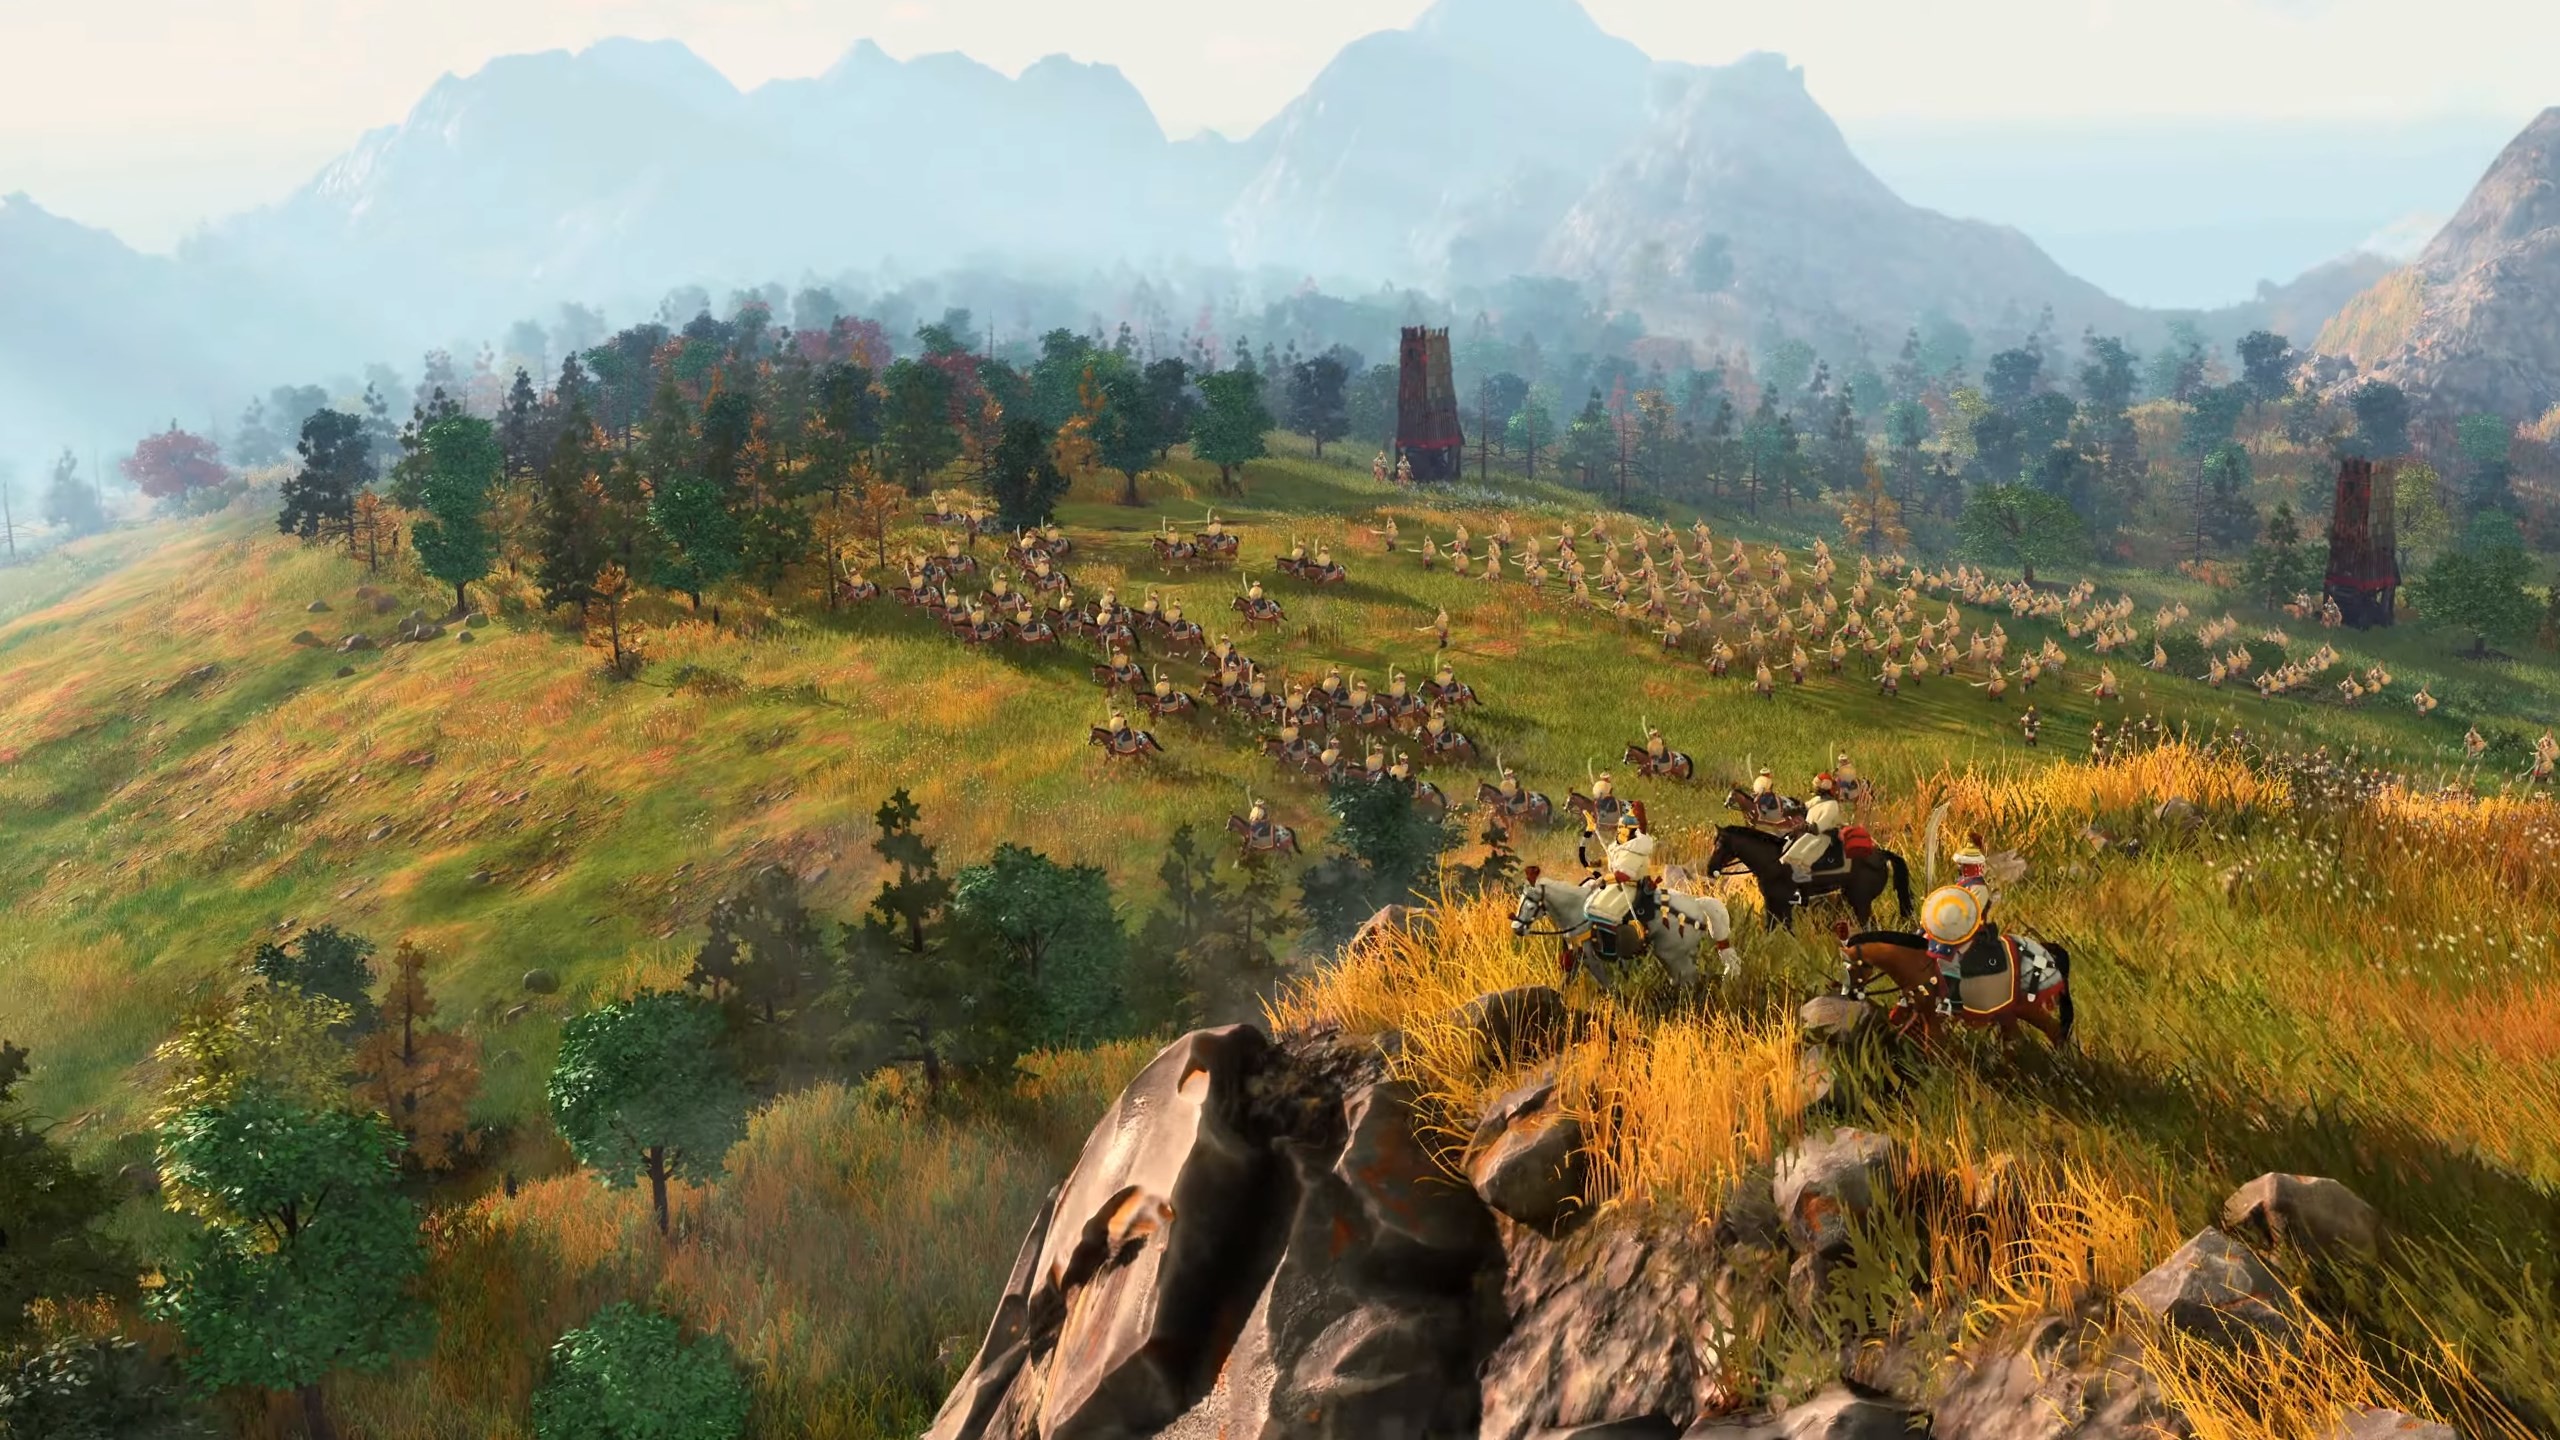 Age of Empires IV is set in the medieval era, gameplay trailer released